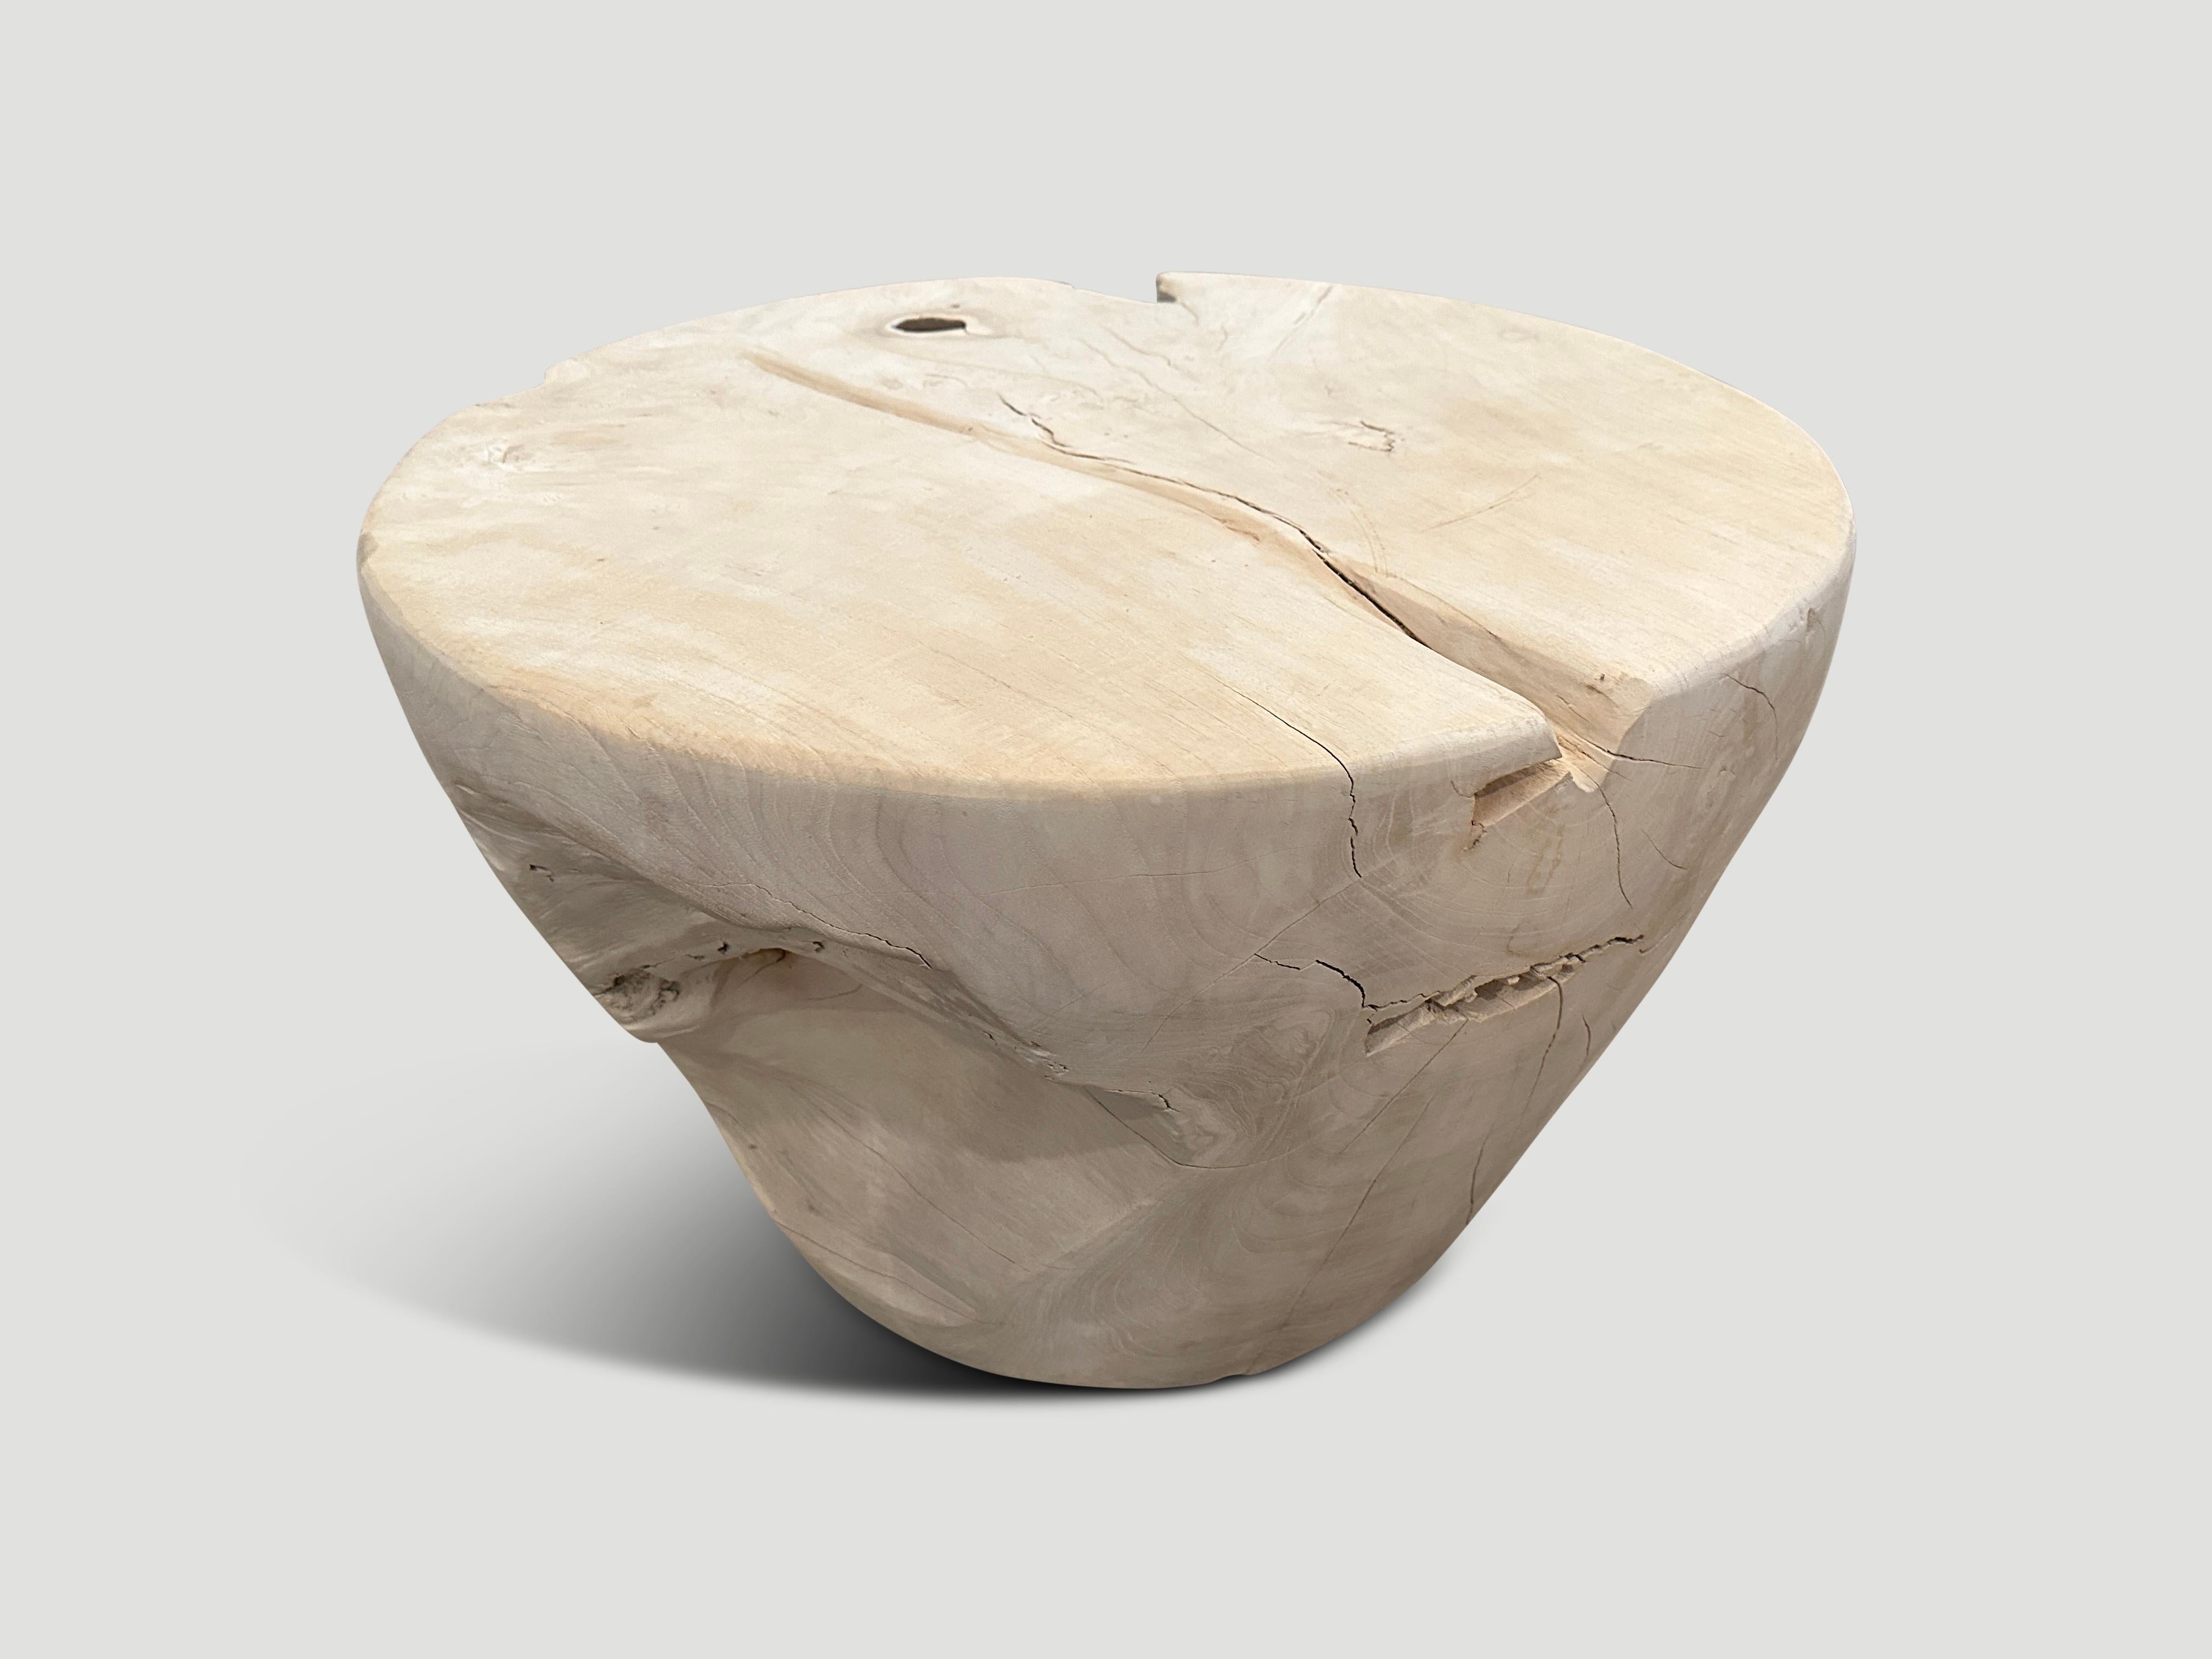 Reclaimed teak root coffee table or oversized side table hand carved into a drum shape whilst respecting the natural organic wood. We added a light white wash revealing the beautiful wood grain. Both usable and sculptural. We have a collection. The